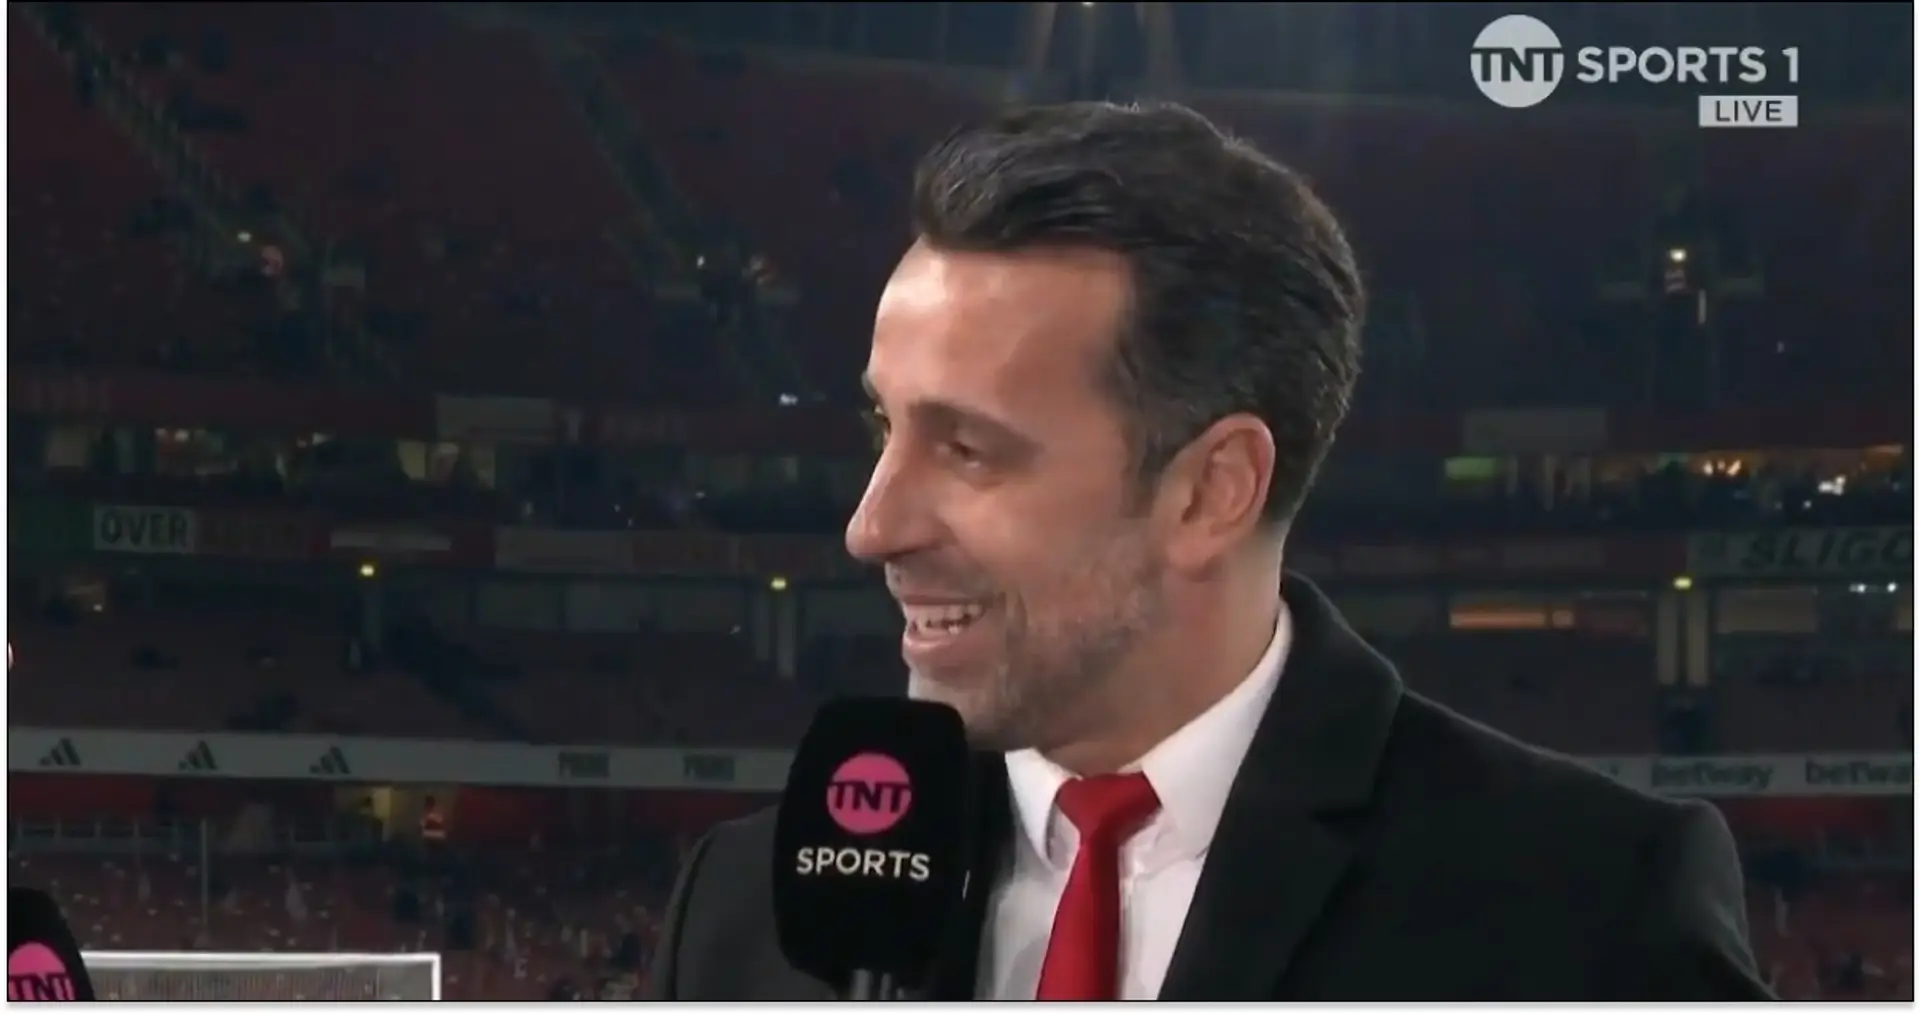 Edu asked if Arsenal will buy new striker: 'We're already scoring a lot'